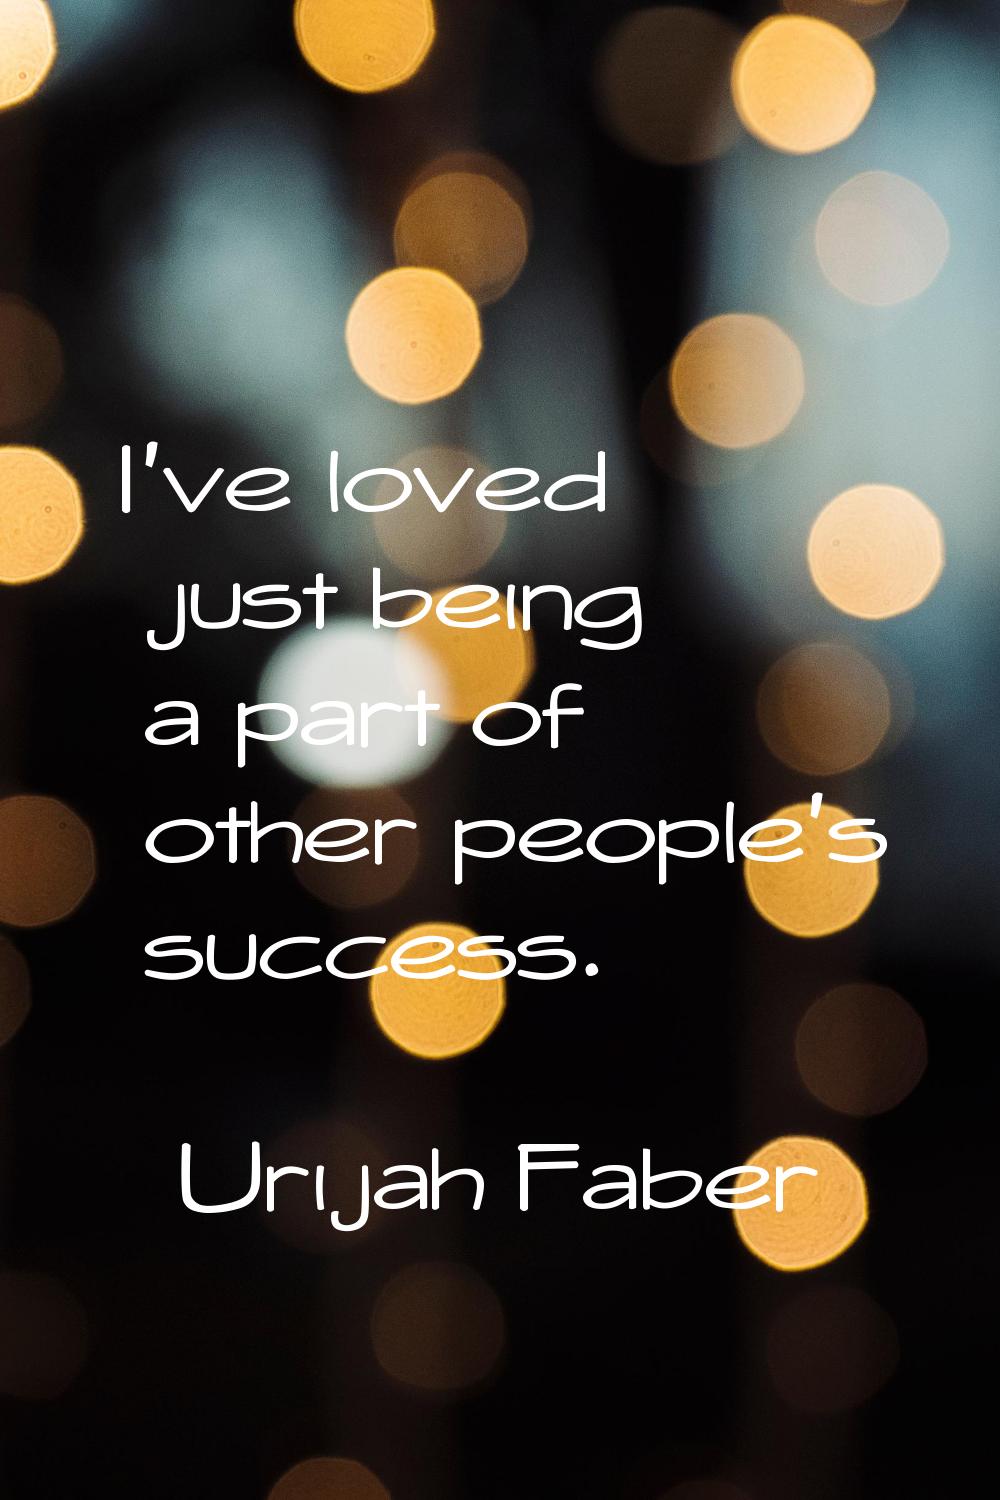 I've loved just being a part of other people's success.